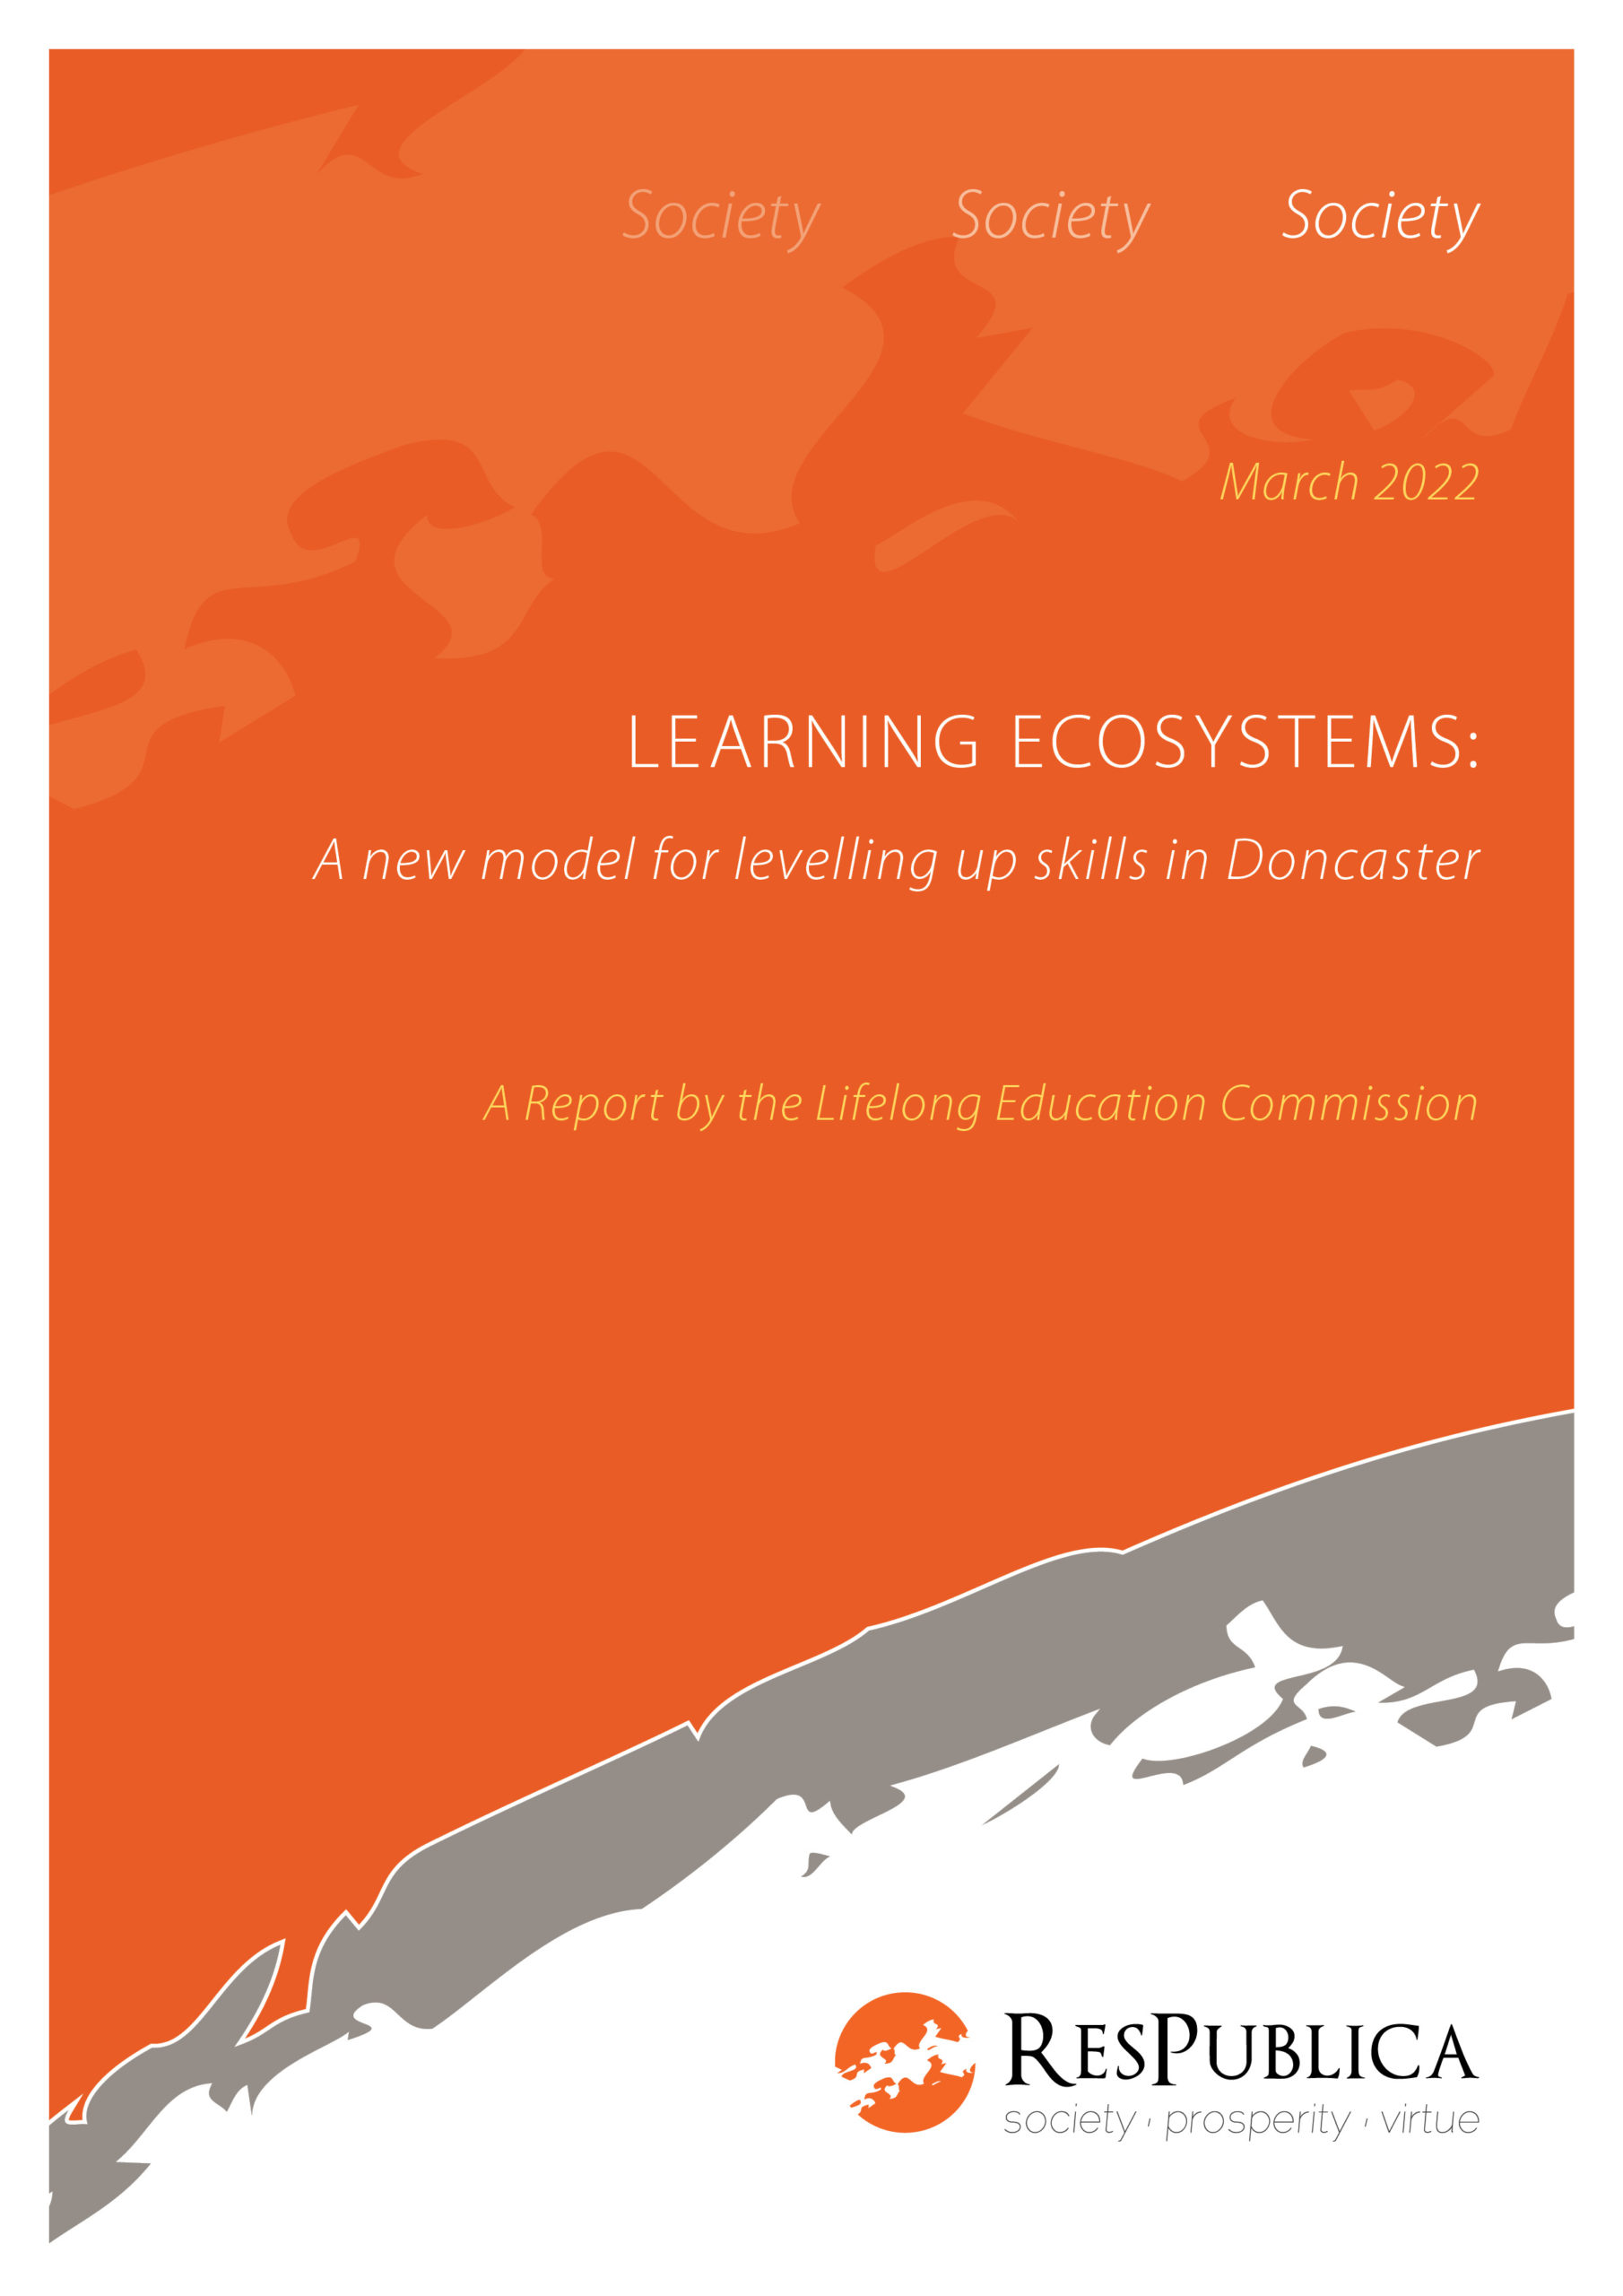 Learning Ecosystems: A new model for levelling up skills in Doncaster